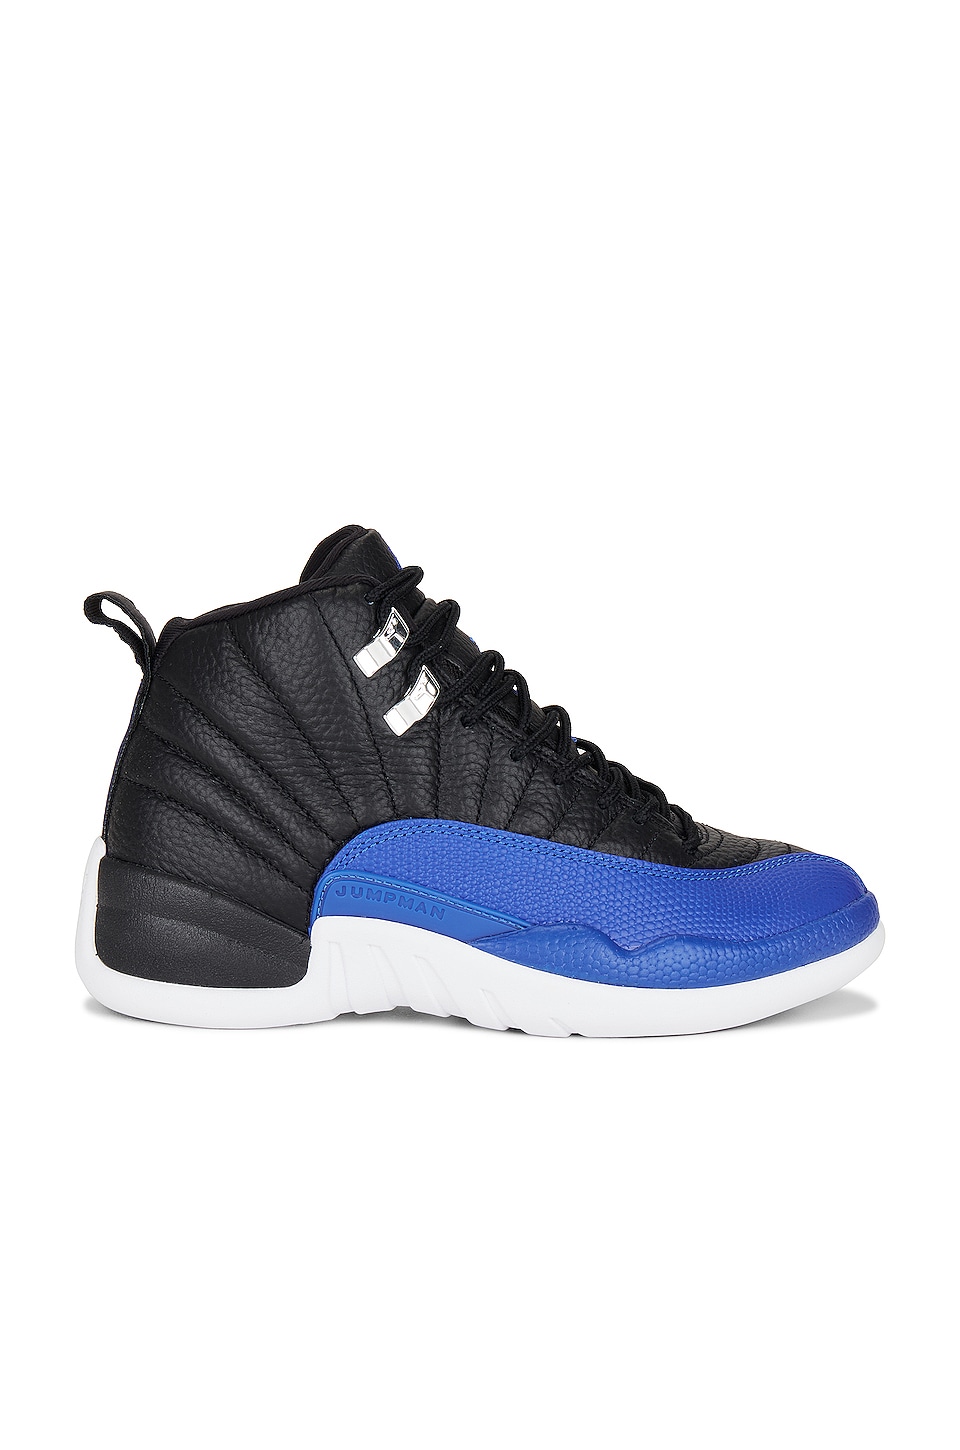 blue and black jordan 12 outfit